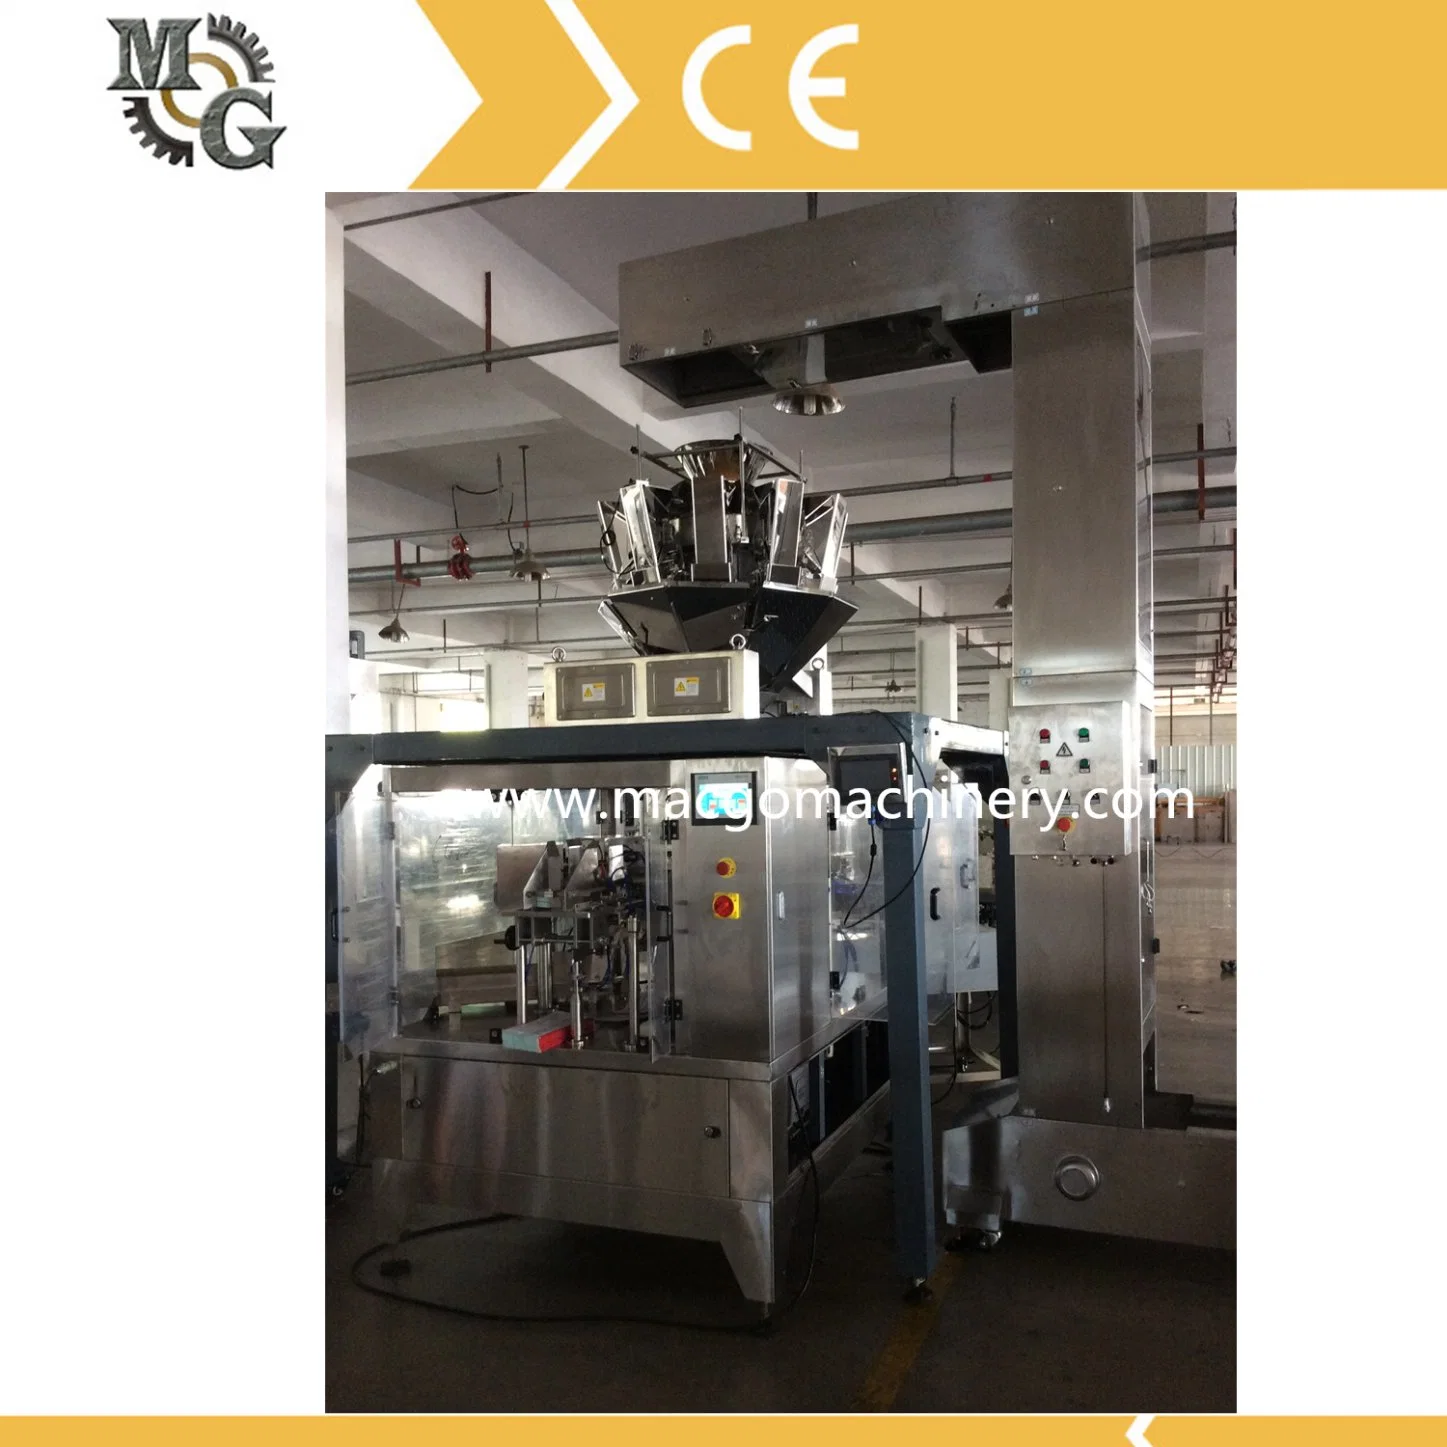 Microwave Popcorn Packaging Machine/Automatic Popcorn Machine/Food Packing Machine for Microwave Popcorn with Paper Bag